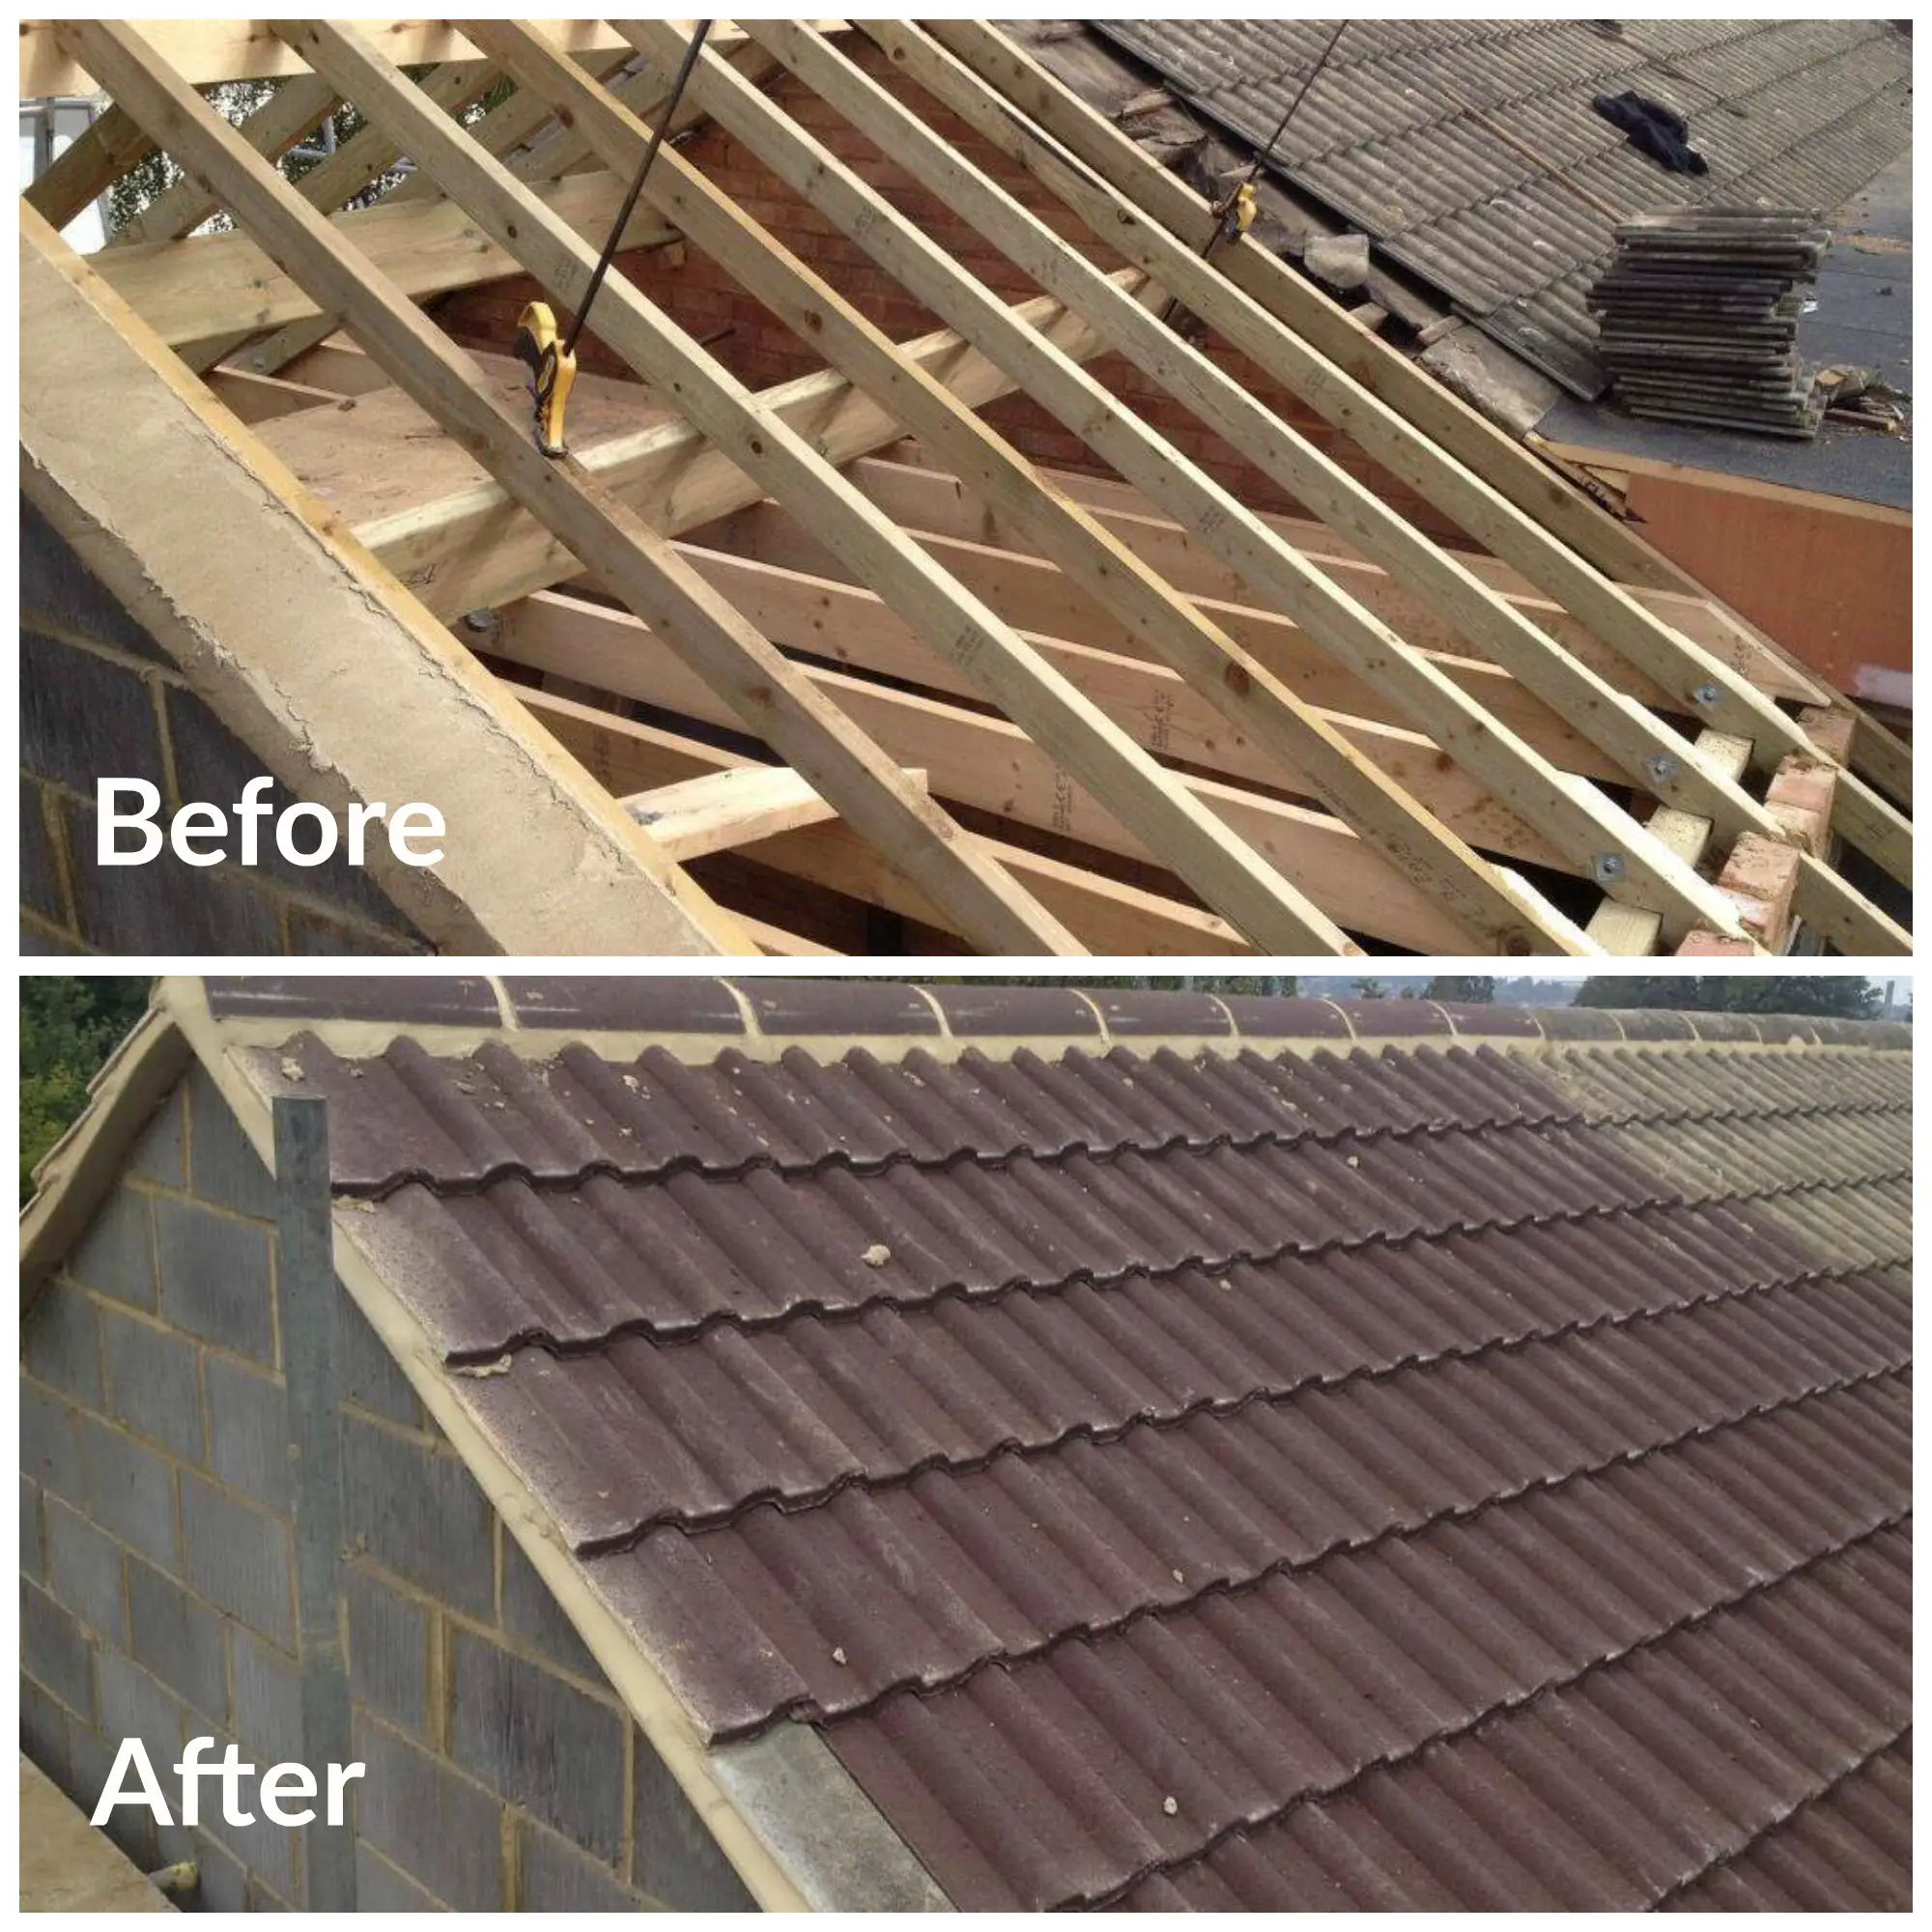 Red tiled roof before and after